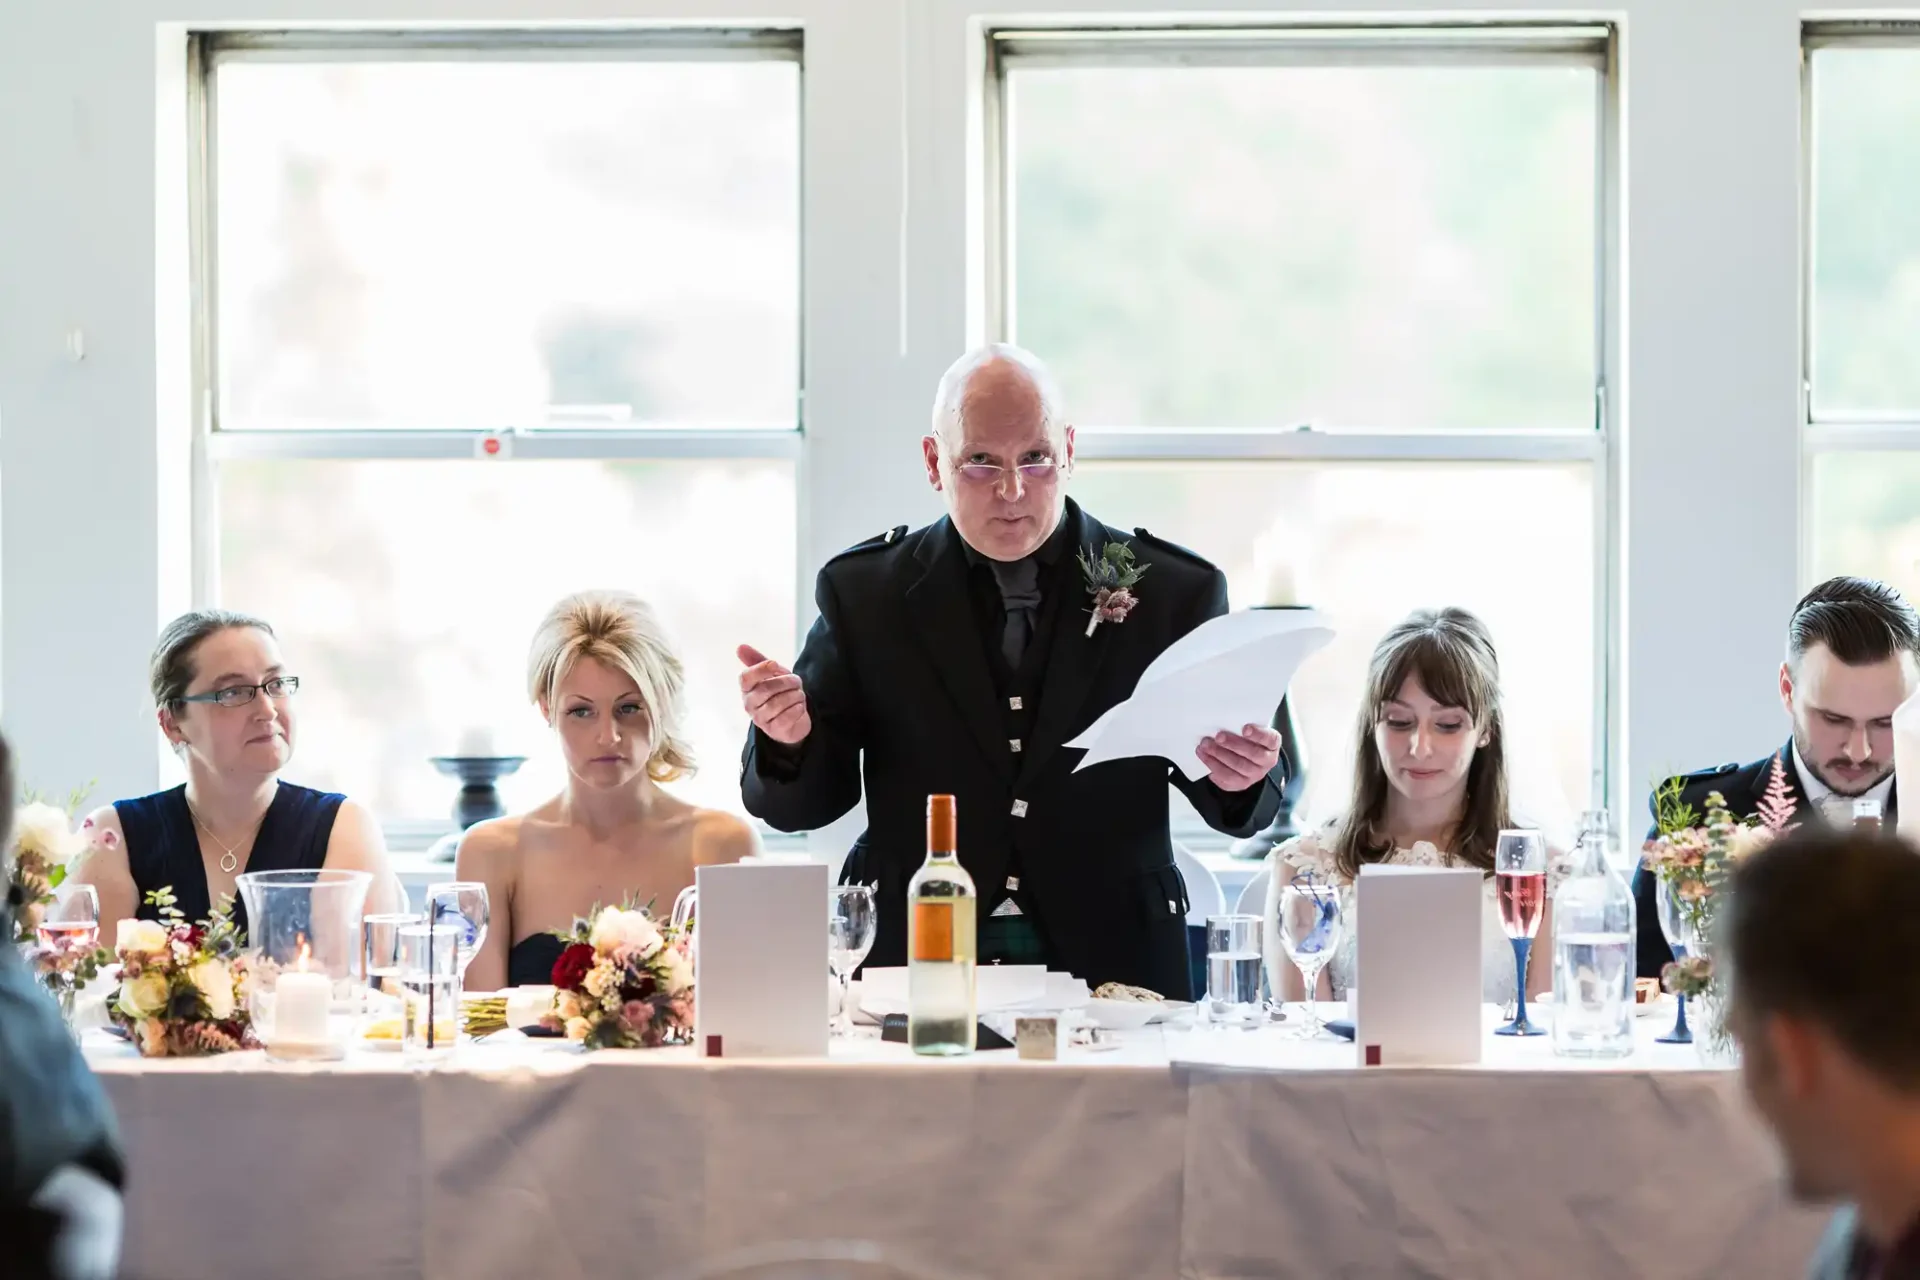 An elderly man reads from a paper at a wedding reception table, with guests seated around him looking attentive.